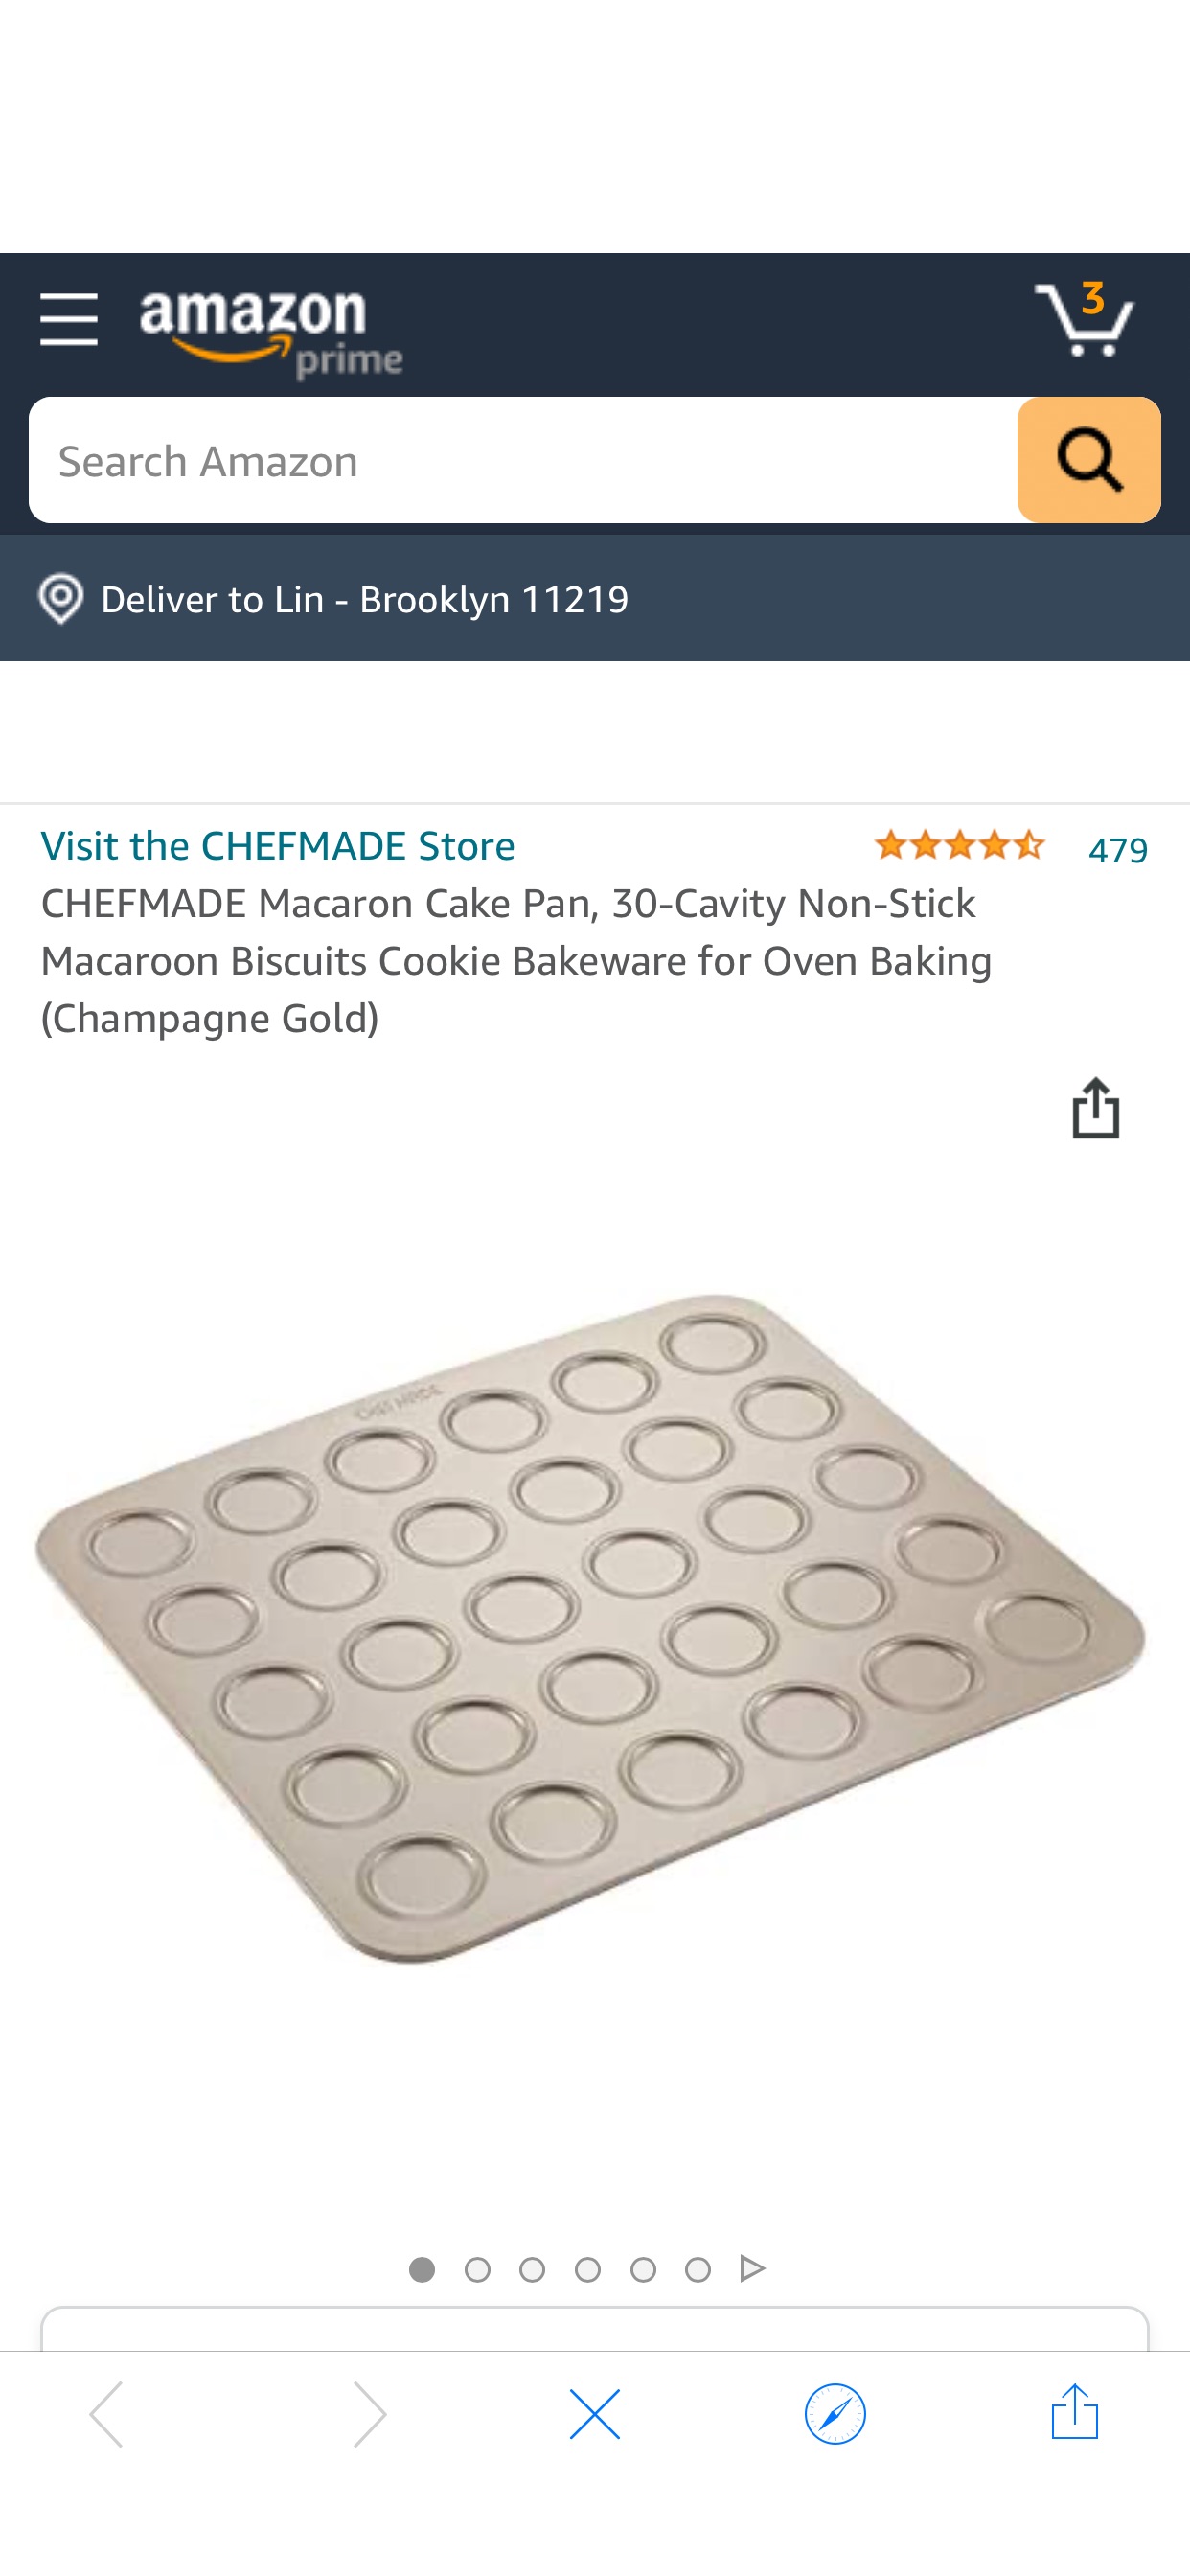 Amazon.com: CHEFMADE Macaron Cake Pan, 30-Cavity Non-Stick Macaroon Biscuits Cookie Bakeware for Oven Baking (Champagne Gold): Kitchen & Dining学厨不粘马卡龙曲奇饼干烤盘